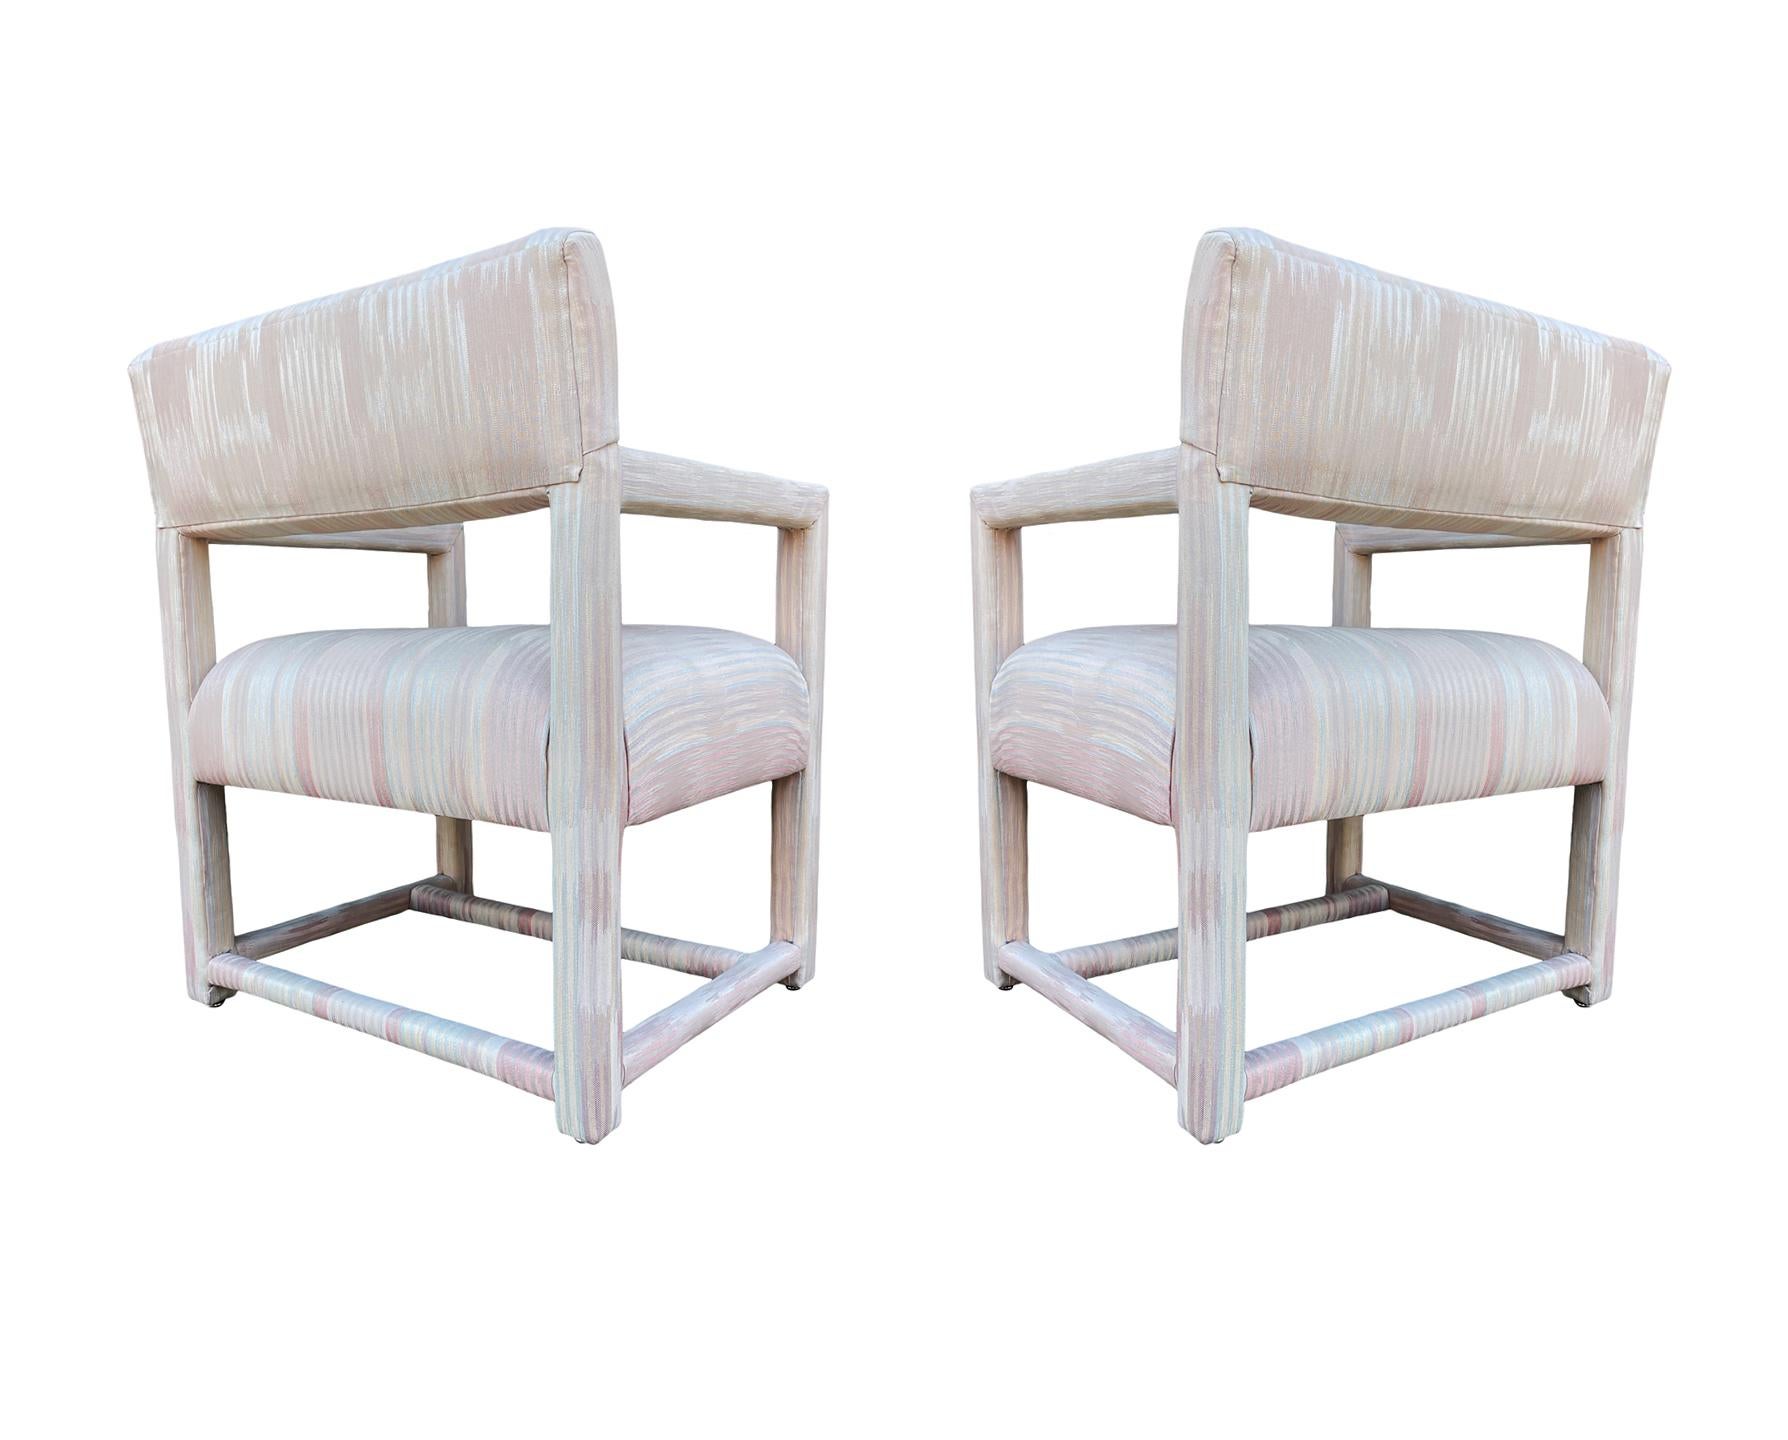 Pair of Mid-Century Modern Parsons Armchair Lounge Chairs after Milo Baughman In Good Condition For Sale In Philadelphia, PA